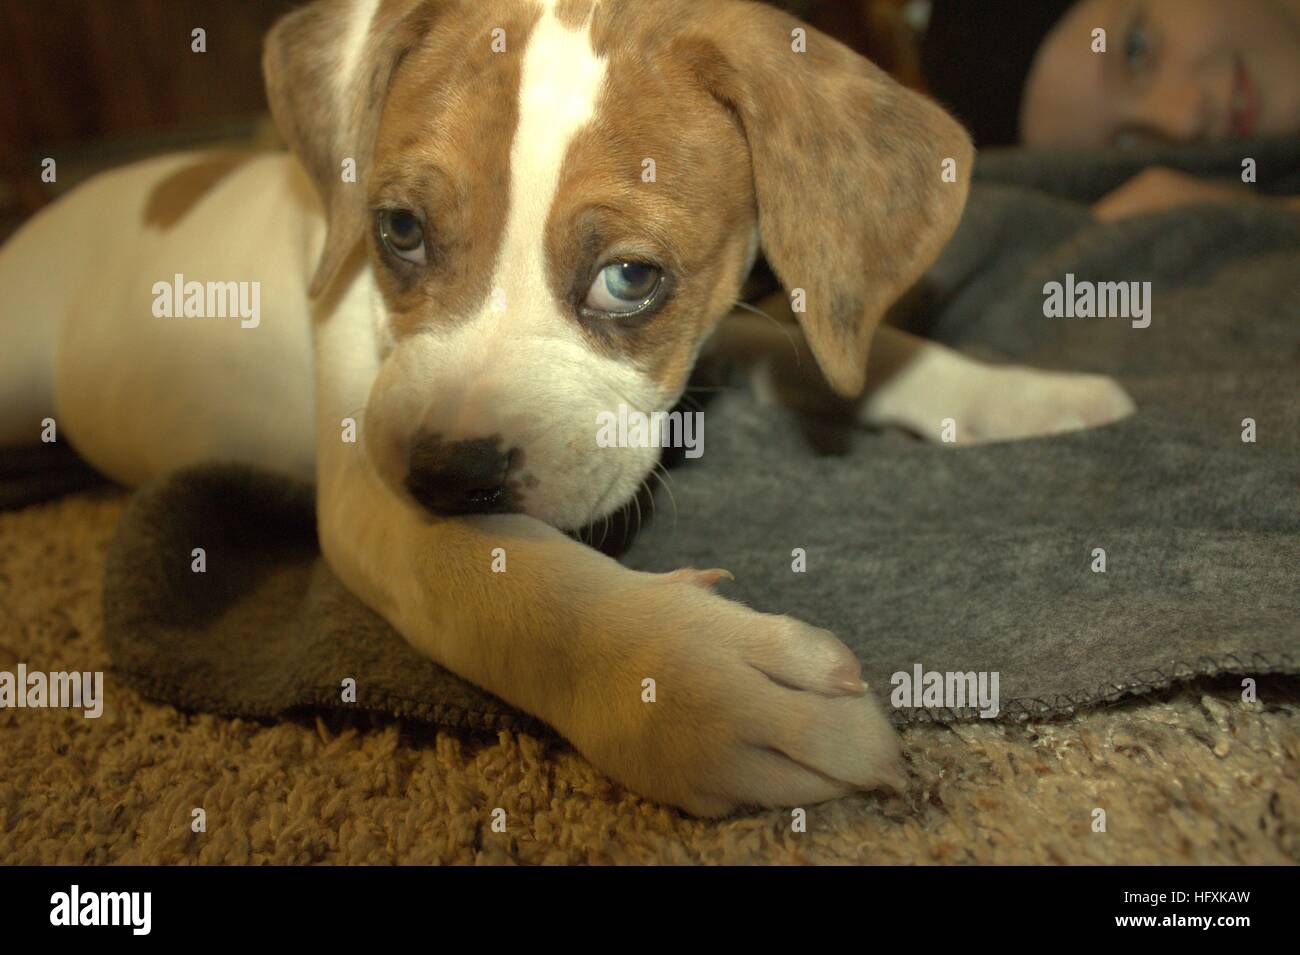 Boxer Mix Puppy With Unusual Eyes Lying On A Blanket Stock Photo